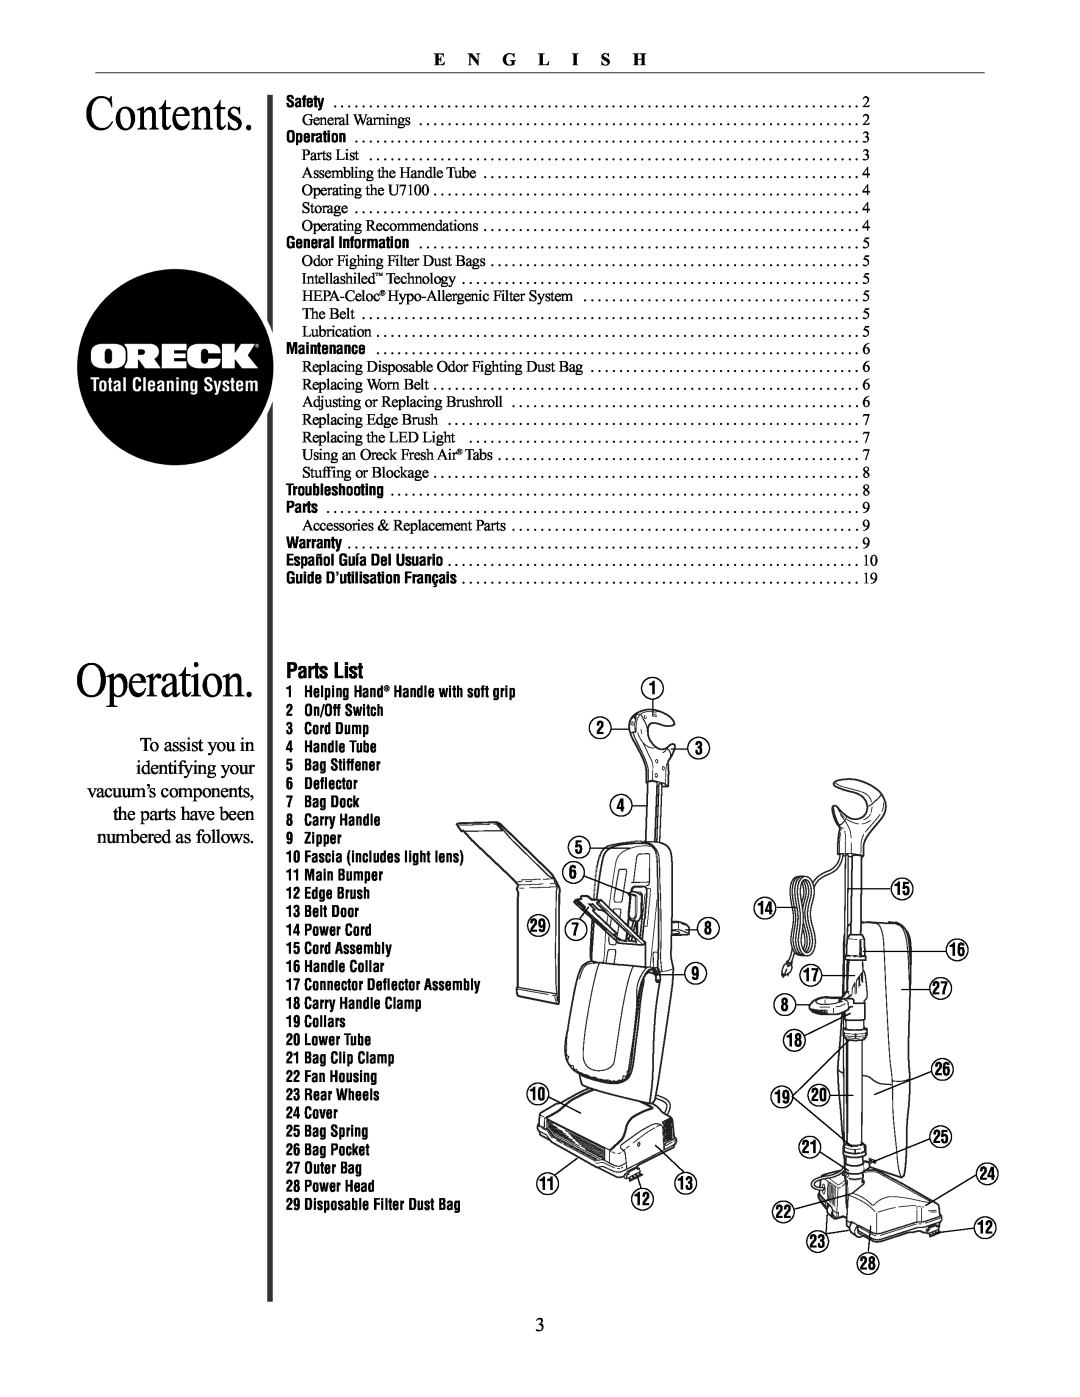 Oreck 79030-01REVA manual Contents, Operation, Parts List, E N G L I S H, Total Cleaning System 